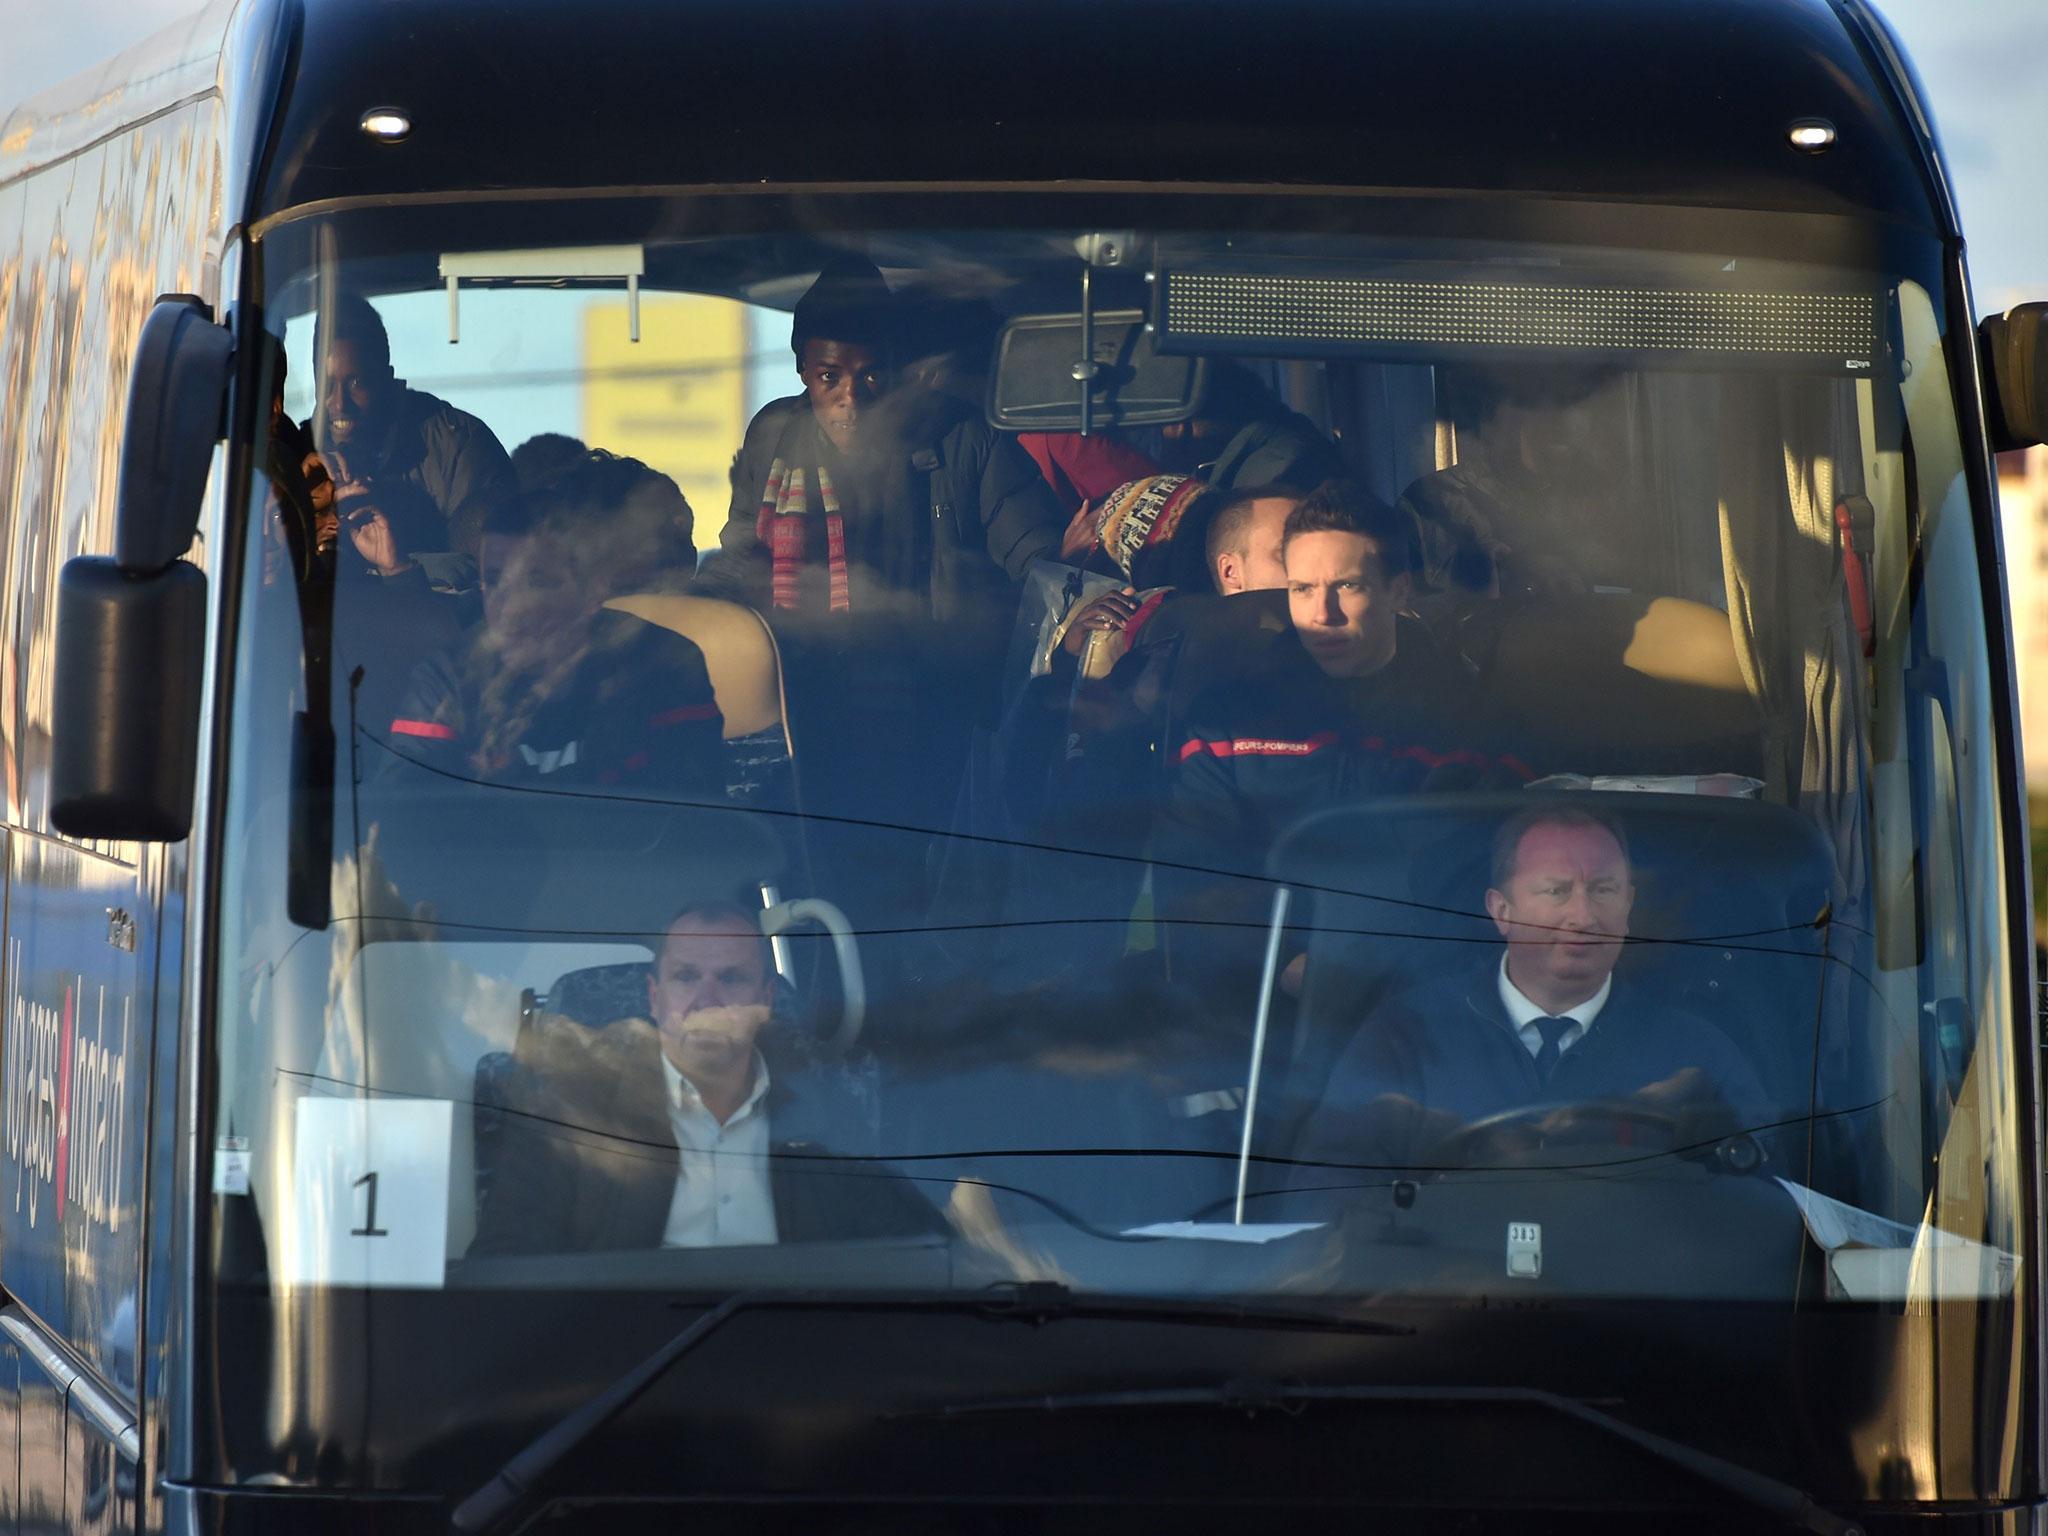 Unaccompanied minors living near the demolished Jungle camp in Calais, housed in specially outfitted shipping containers, are pictured in a bus leaving for a reception centre